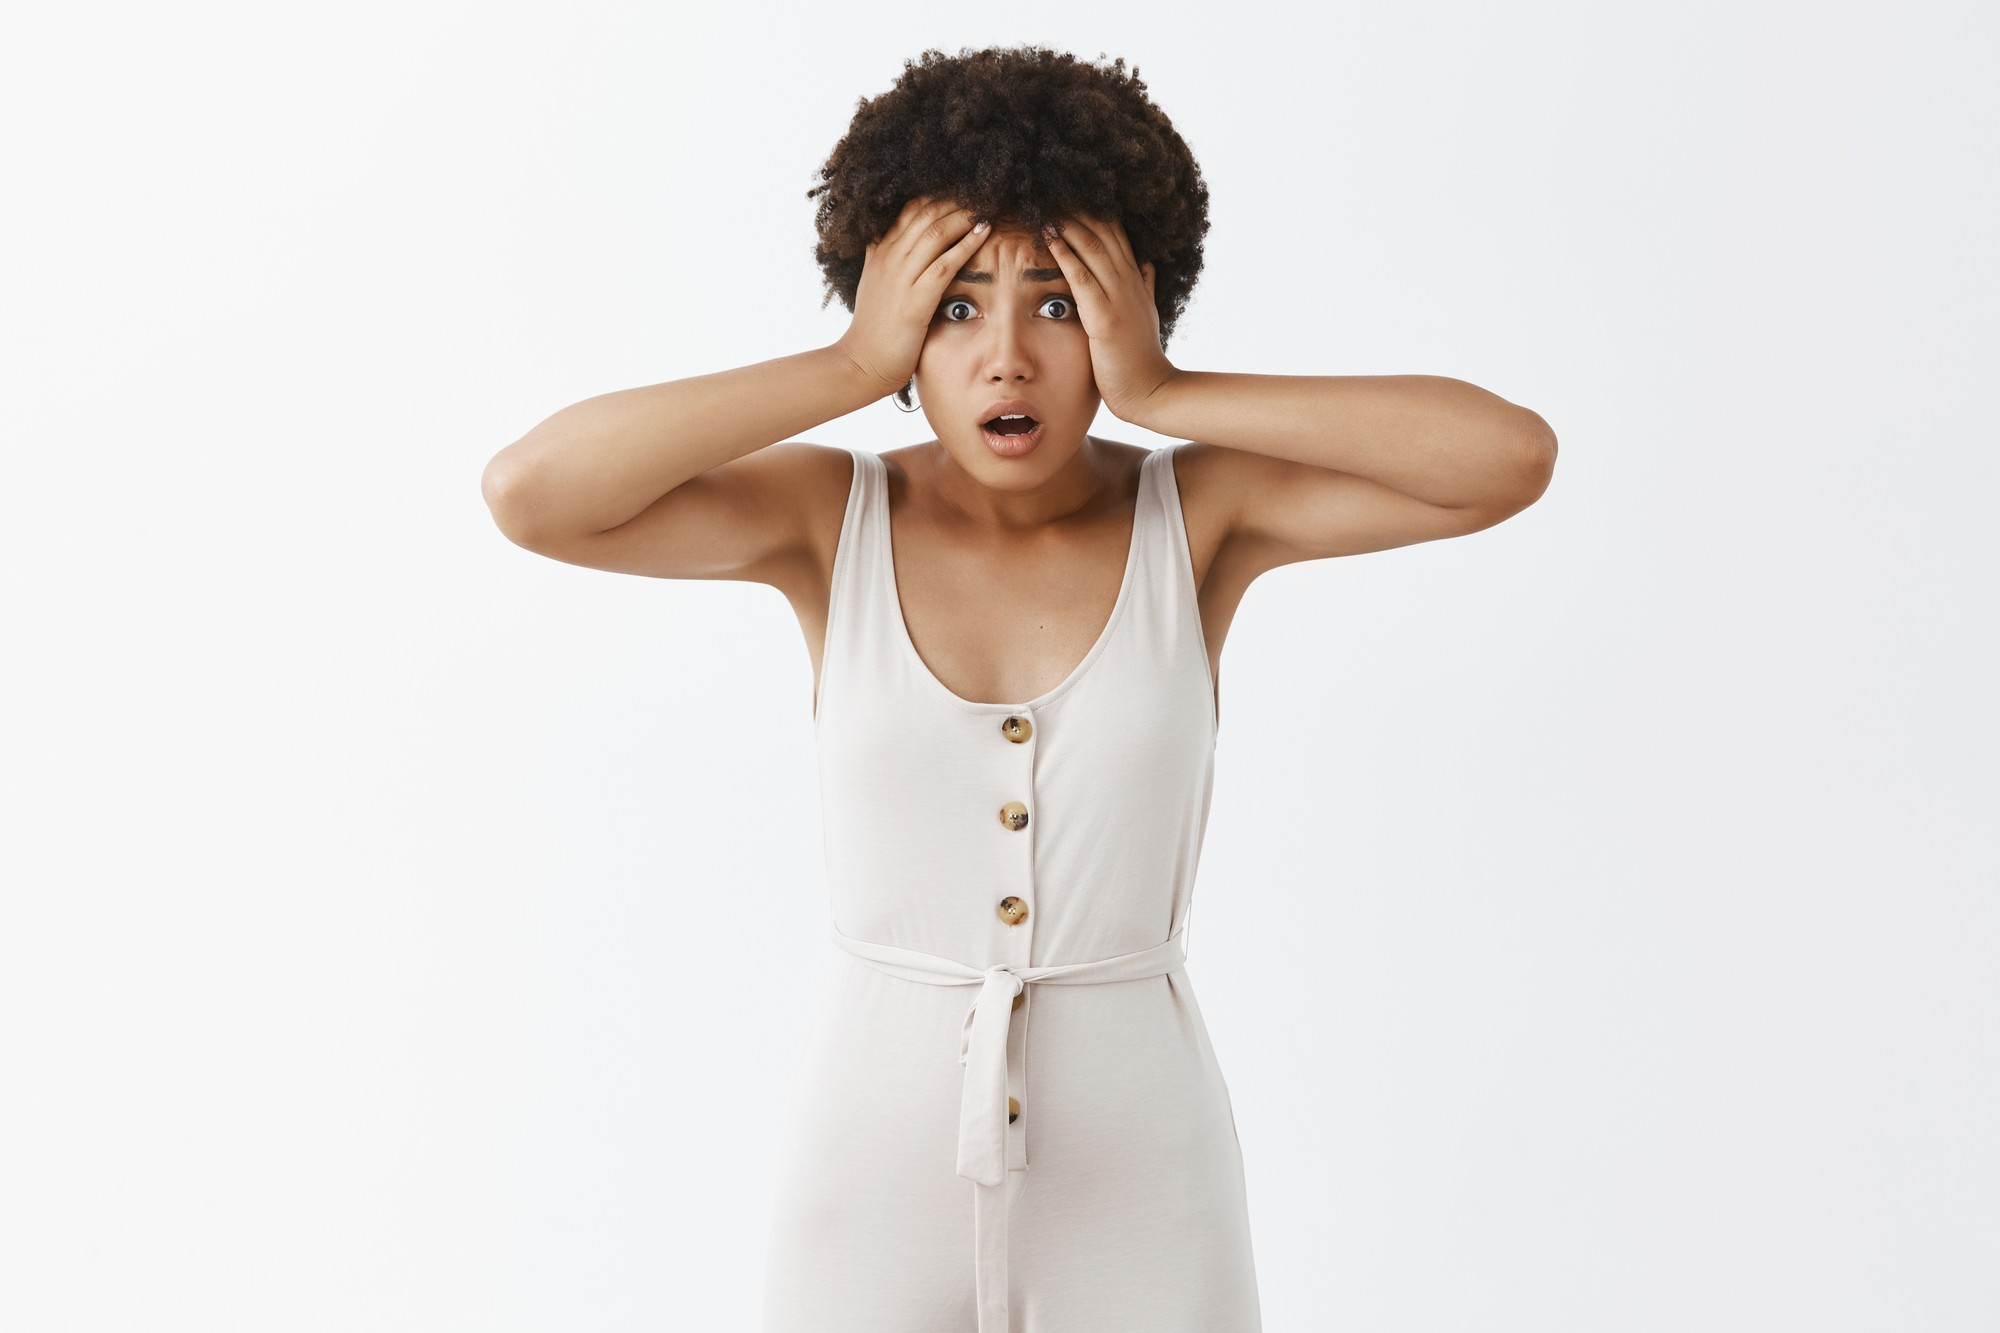 A horrified and embarrassed woman | Source: Freepik